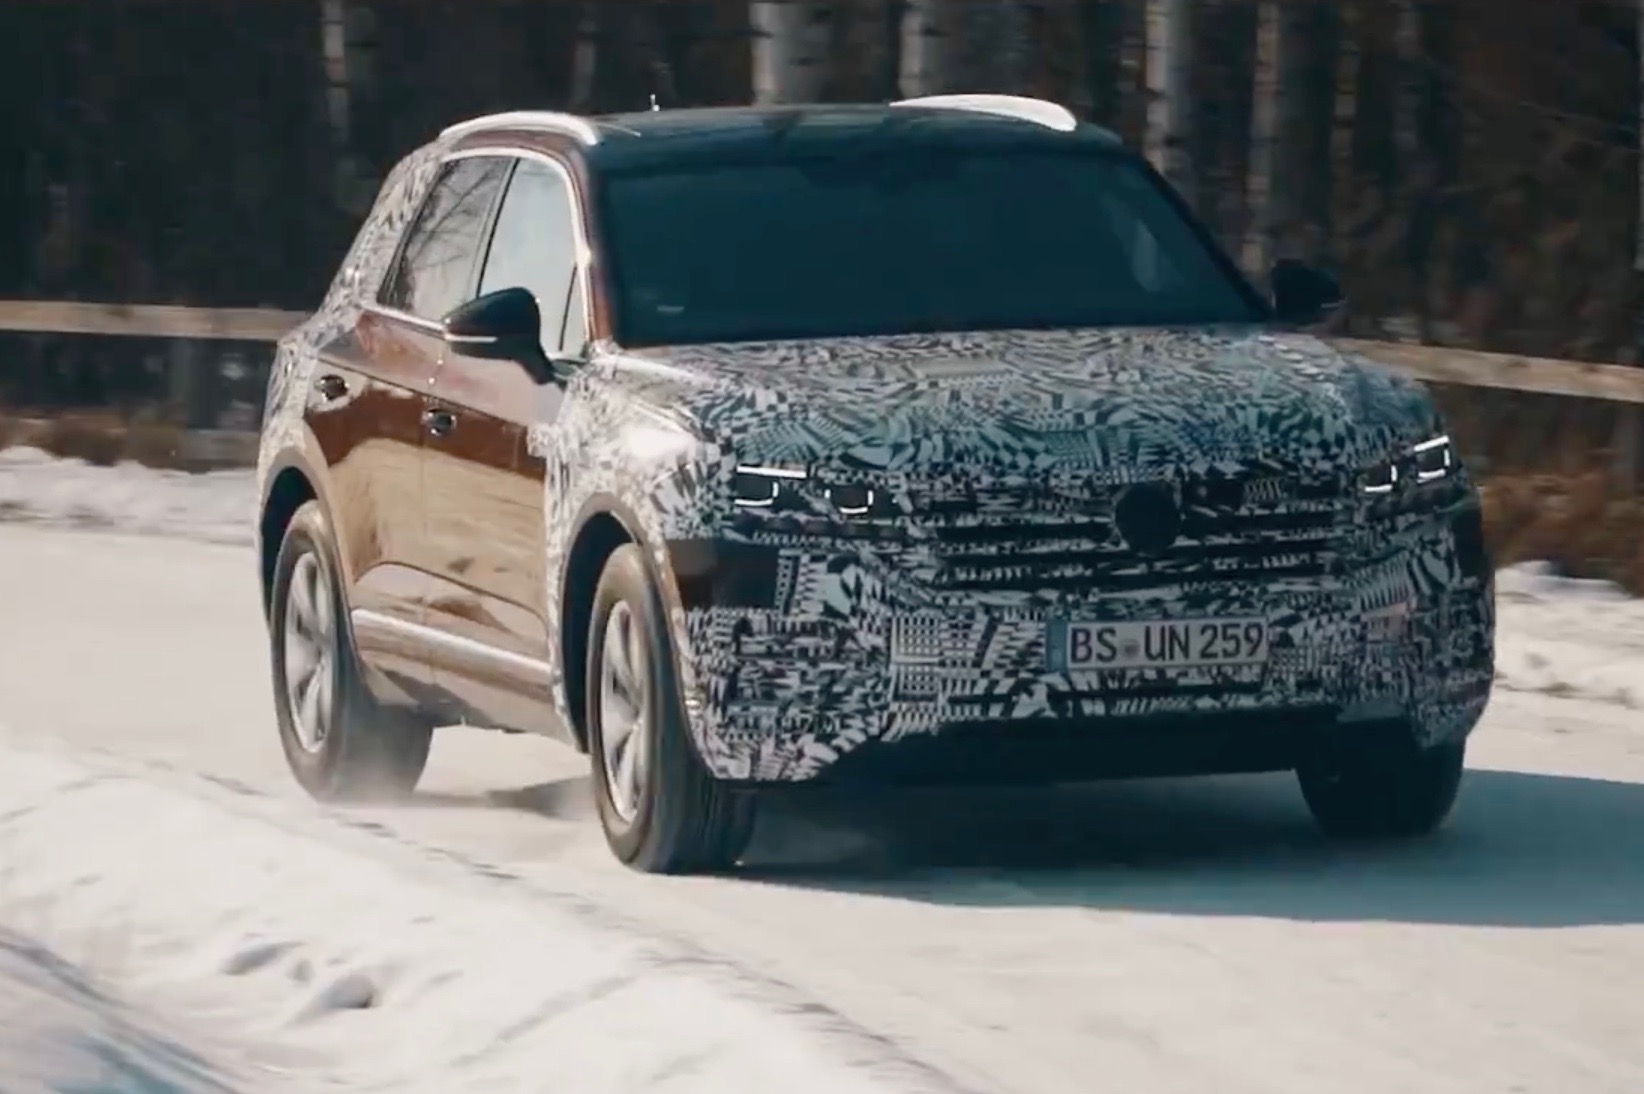 2019 Volkswagen Touareg previewed, prototype driving from Slovakia to Beijing (video)